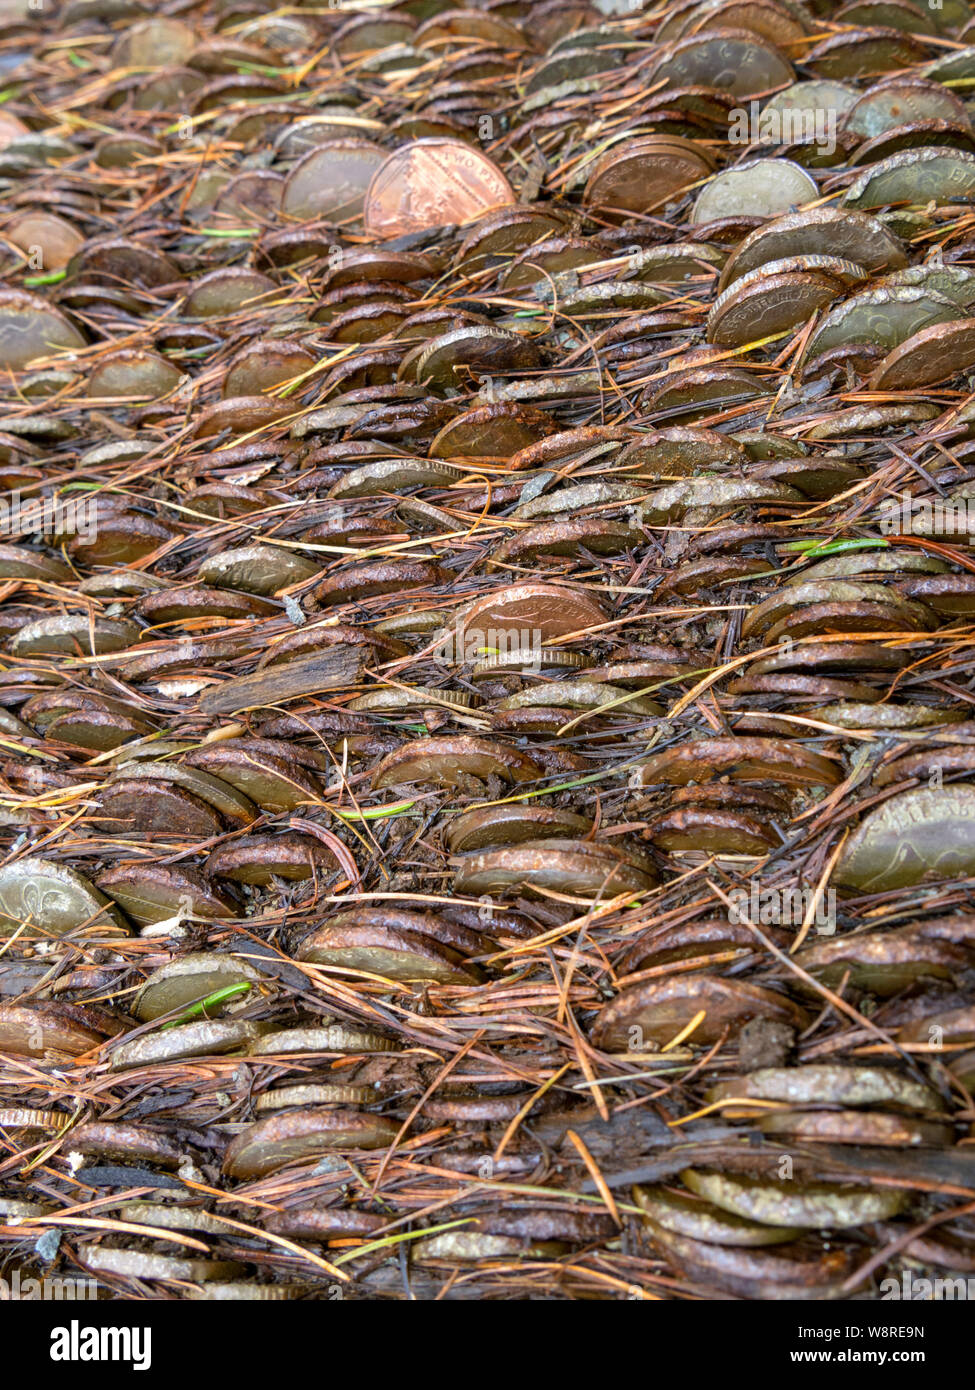 Closeup of hundreds of coins embedded in wooden trunk of Wishing or Money tree Stock Photo